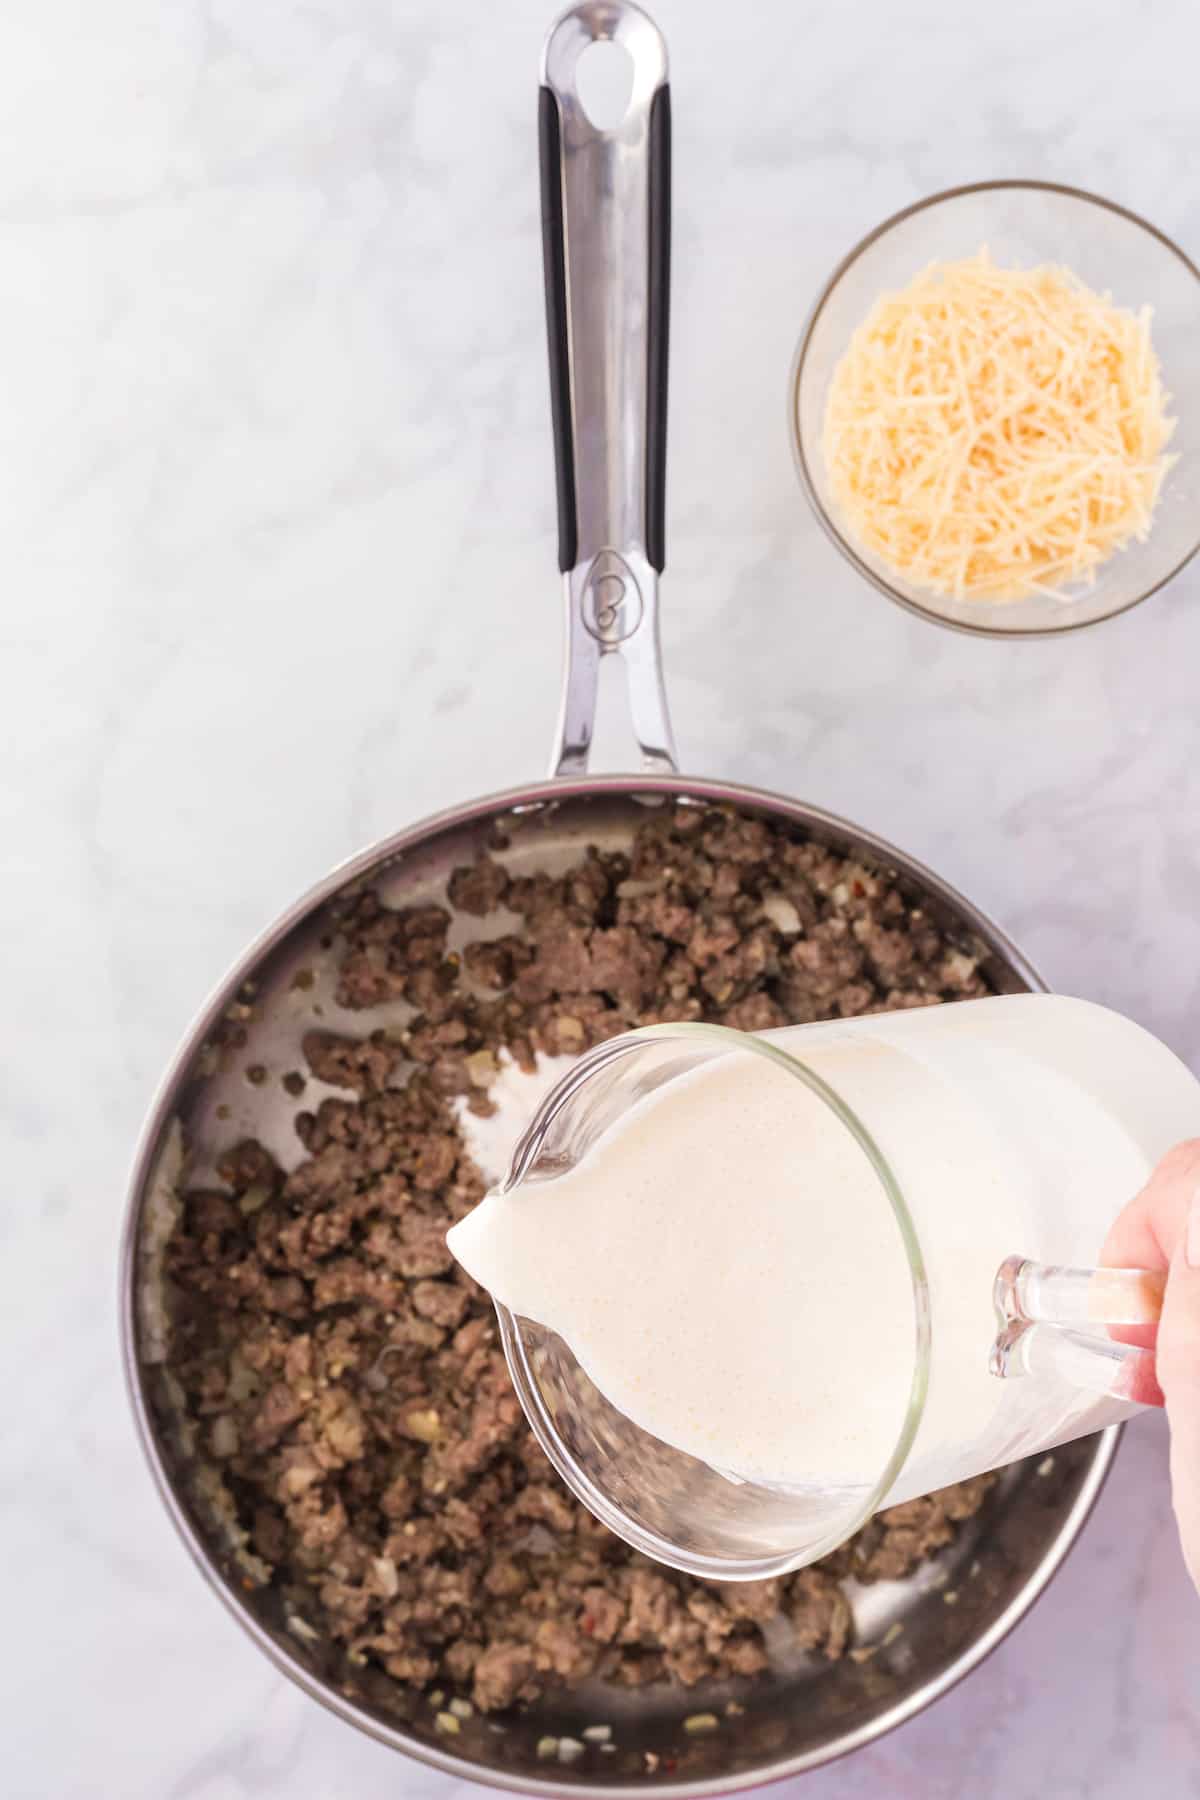 pouring the heavy cream into the skillet with the cooked sausage